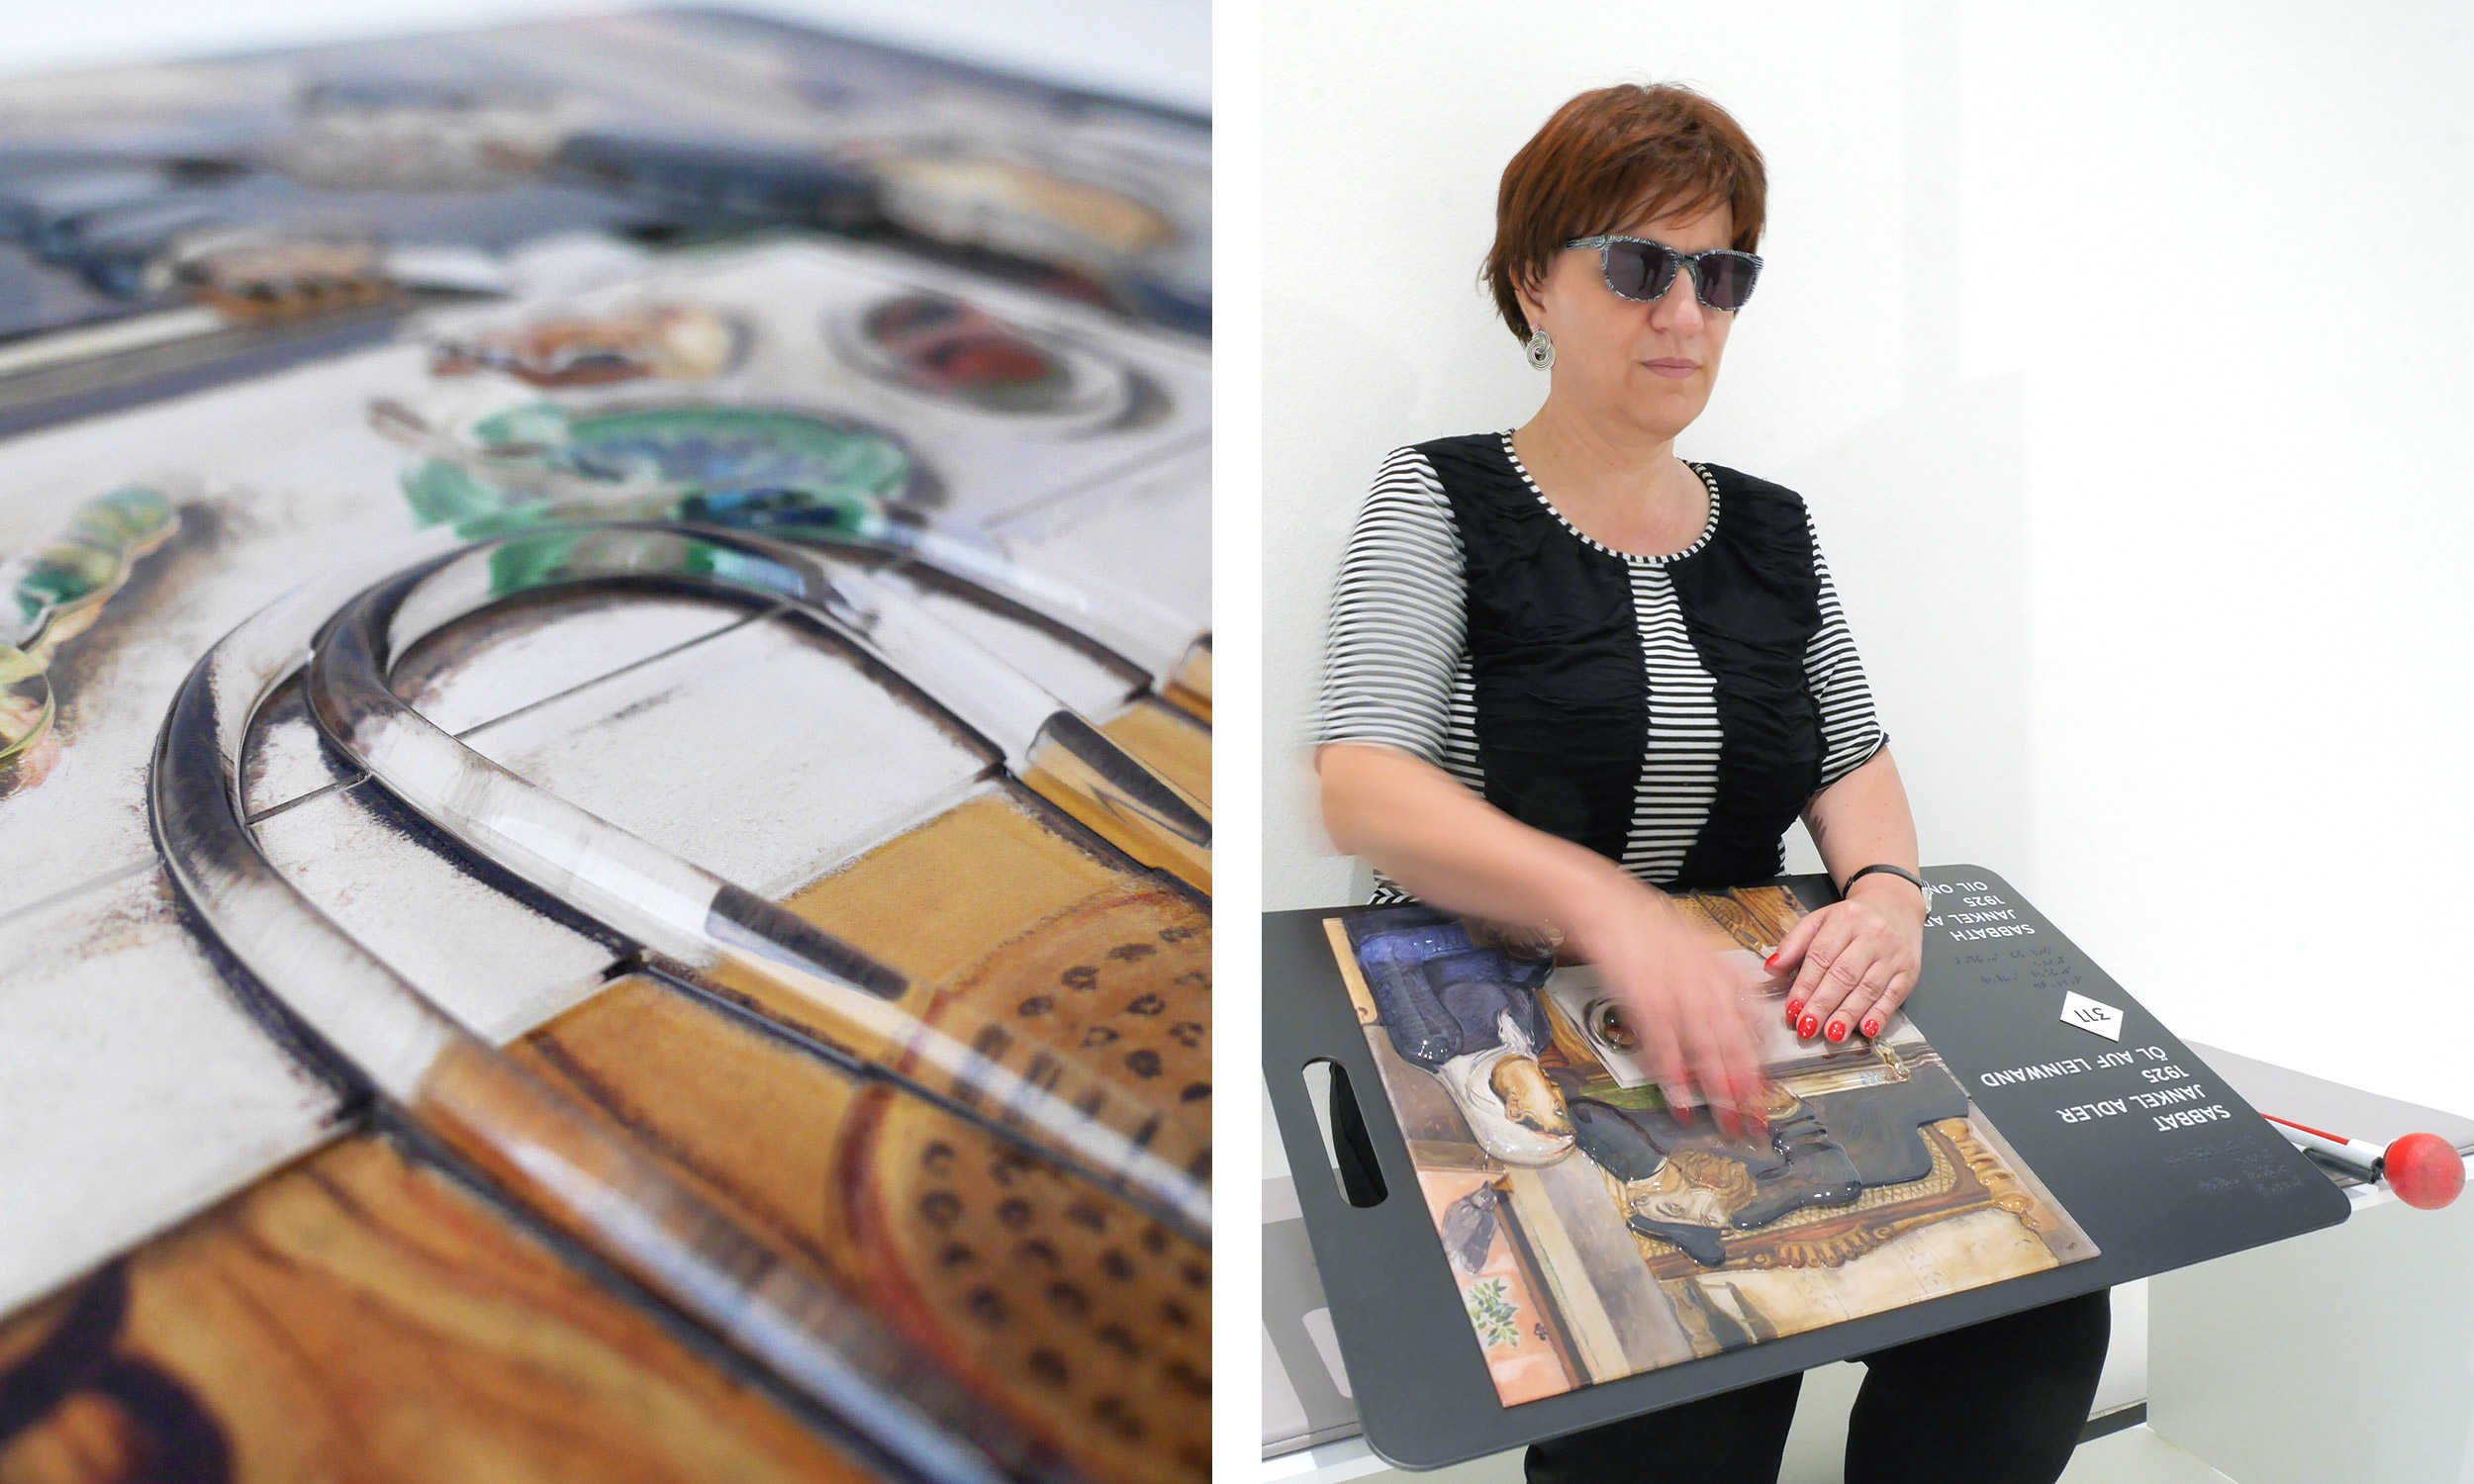 Two photos of the tactile model of the painting "Sabbath" by Janker Adler. The left photo is a detail view of the center of the acrylic tactile model and shows parts of the structure. The right photo shows a woman in the center of the photo sitting on a bench with a mobile tactile painting on her lap. The woman is palpating the center of the painting.